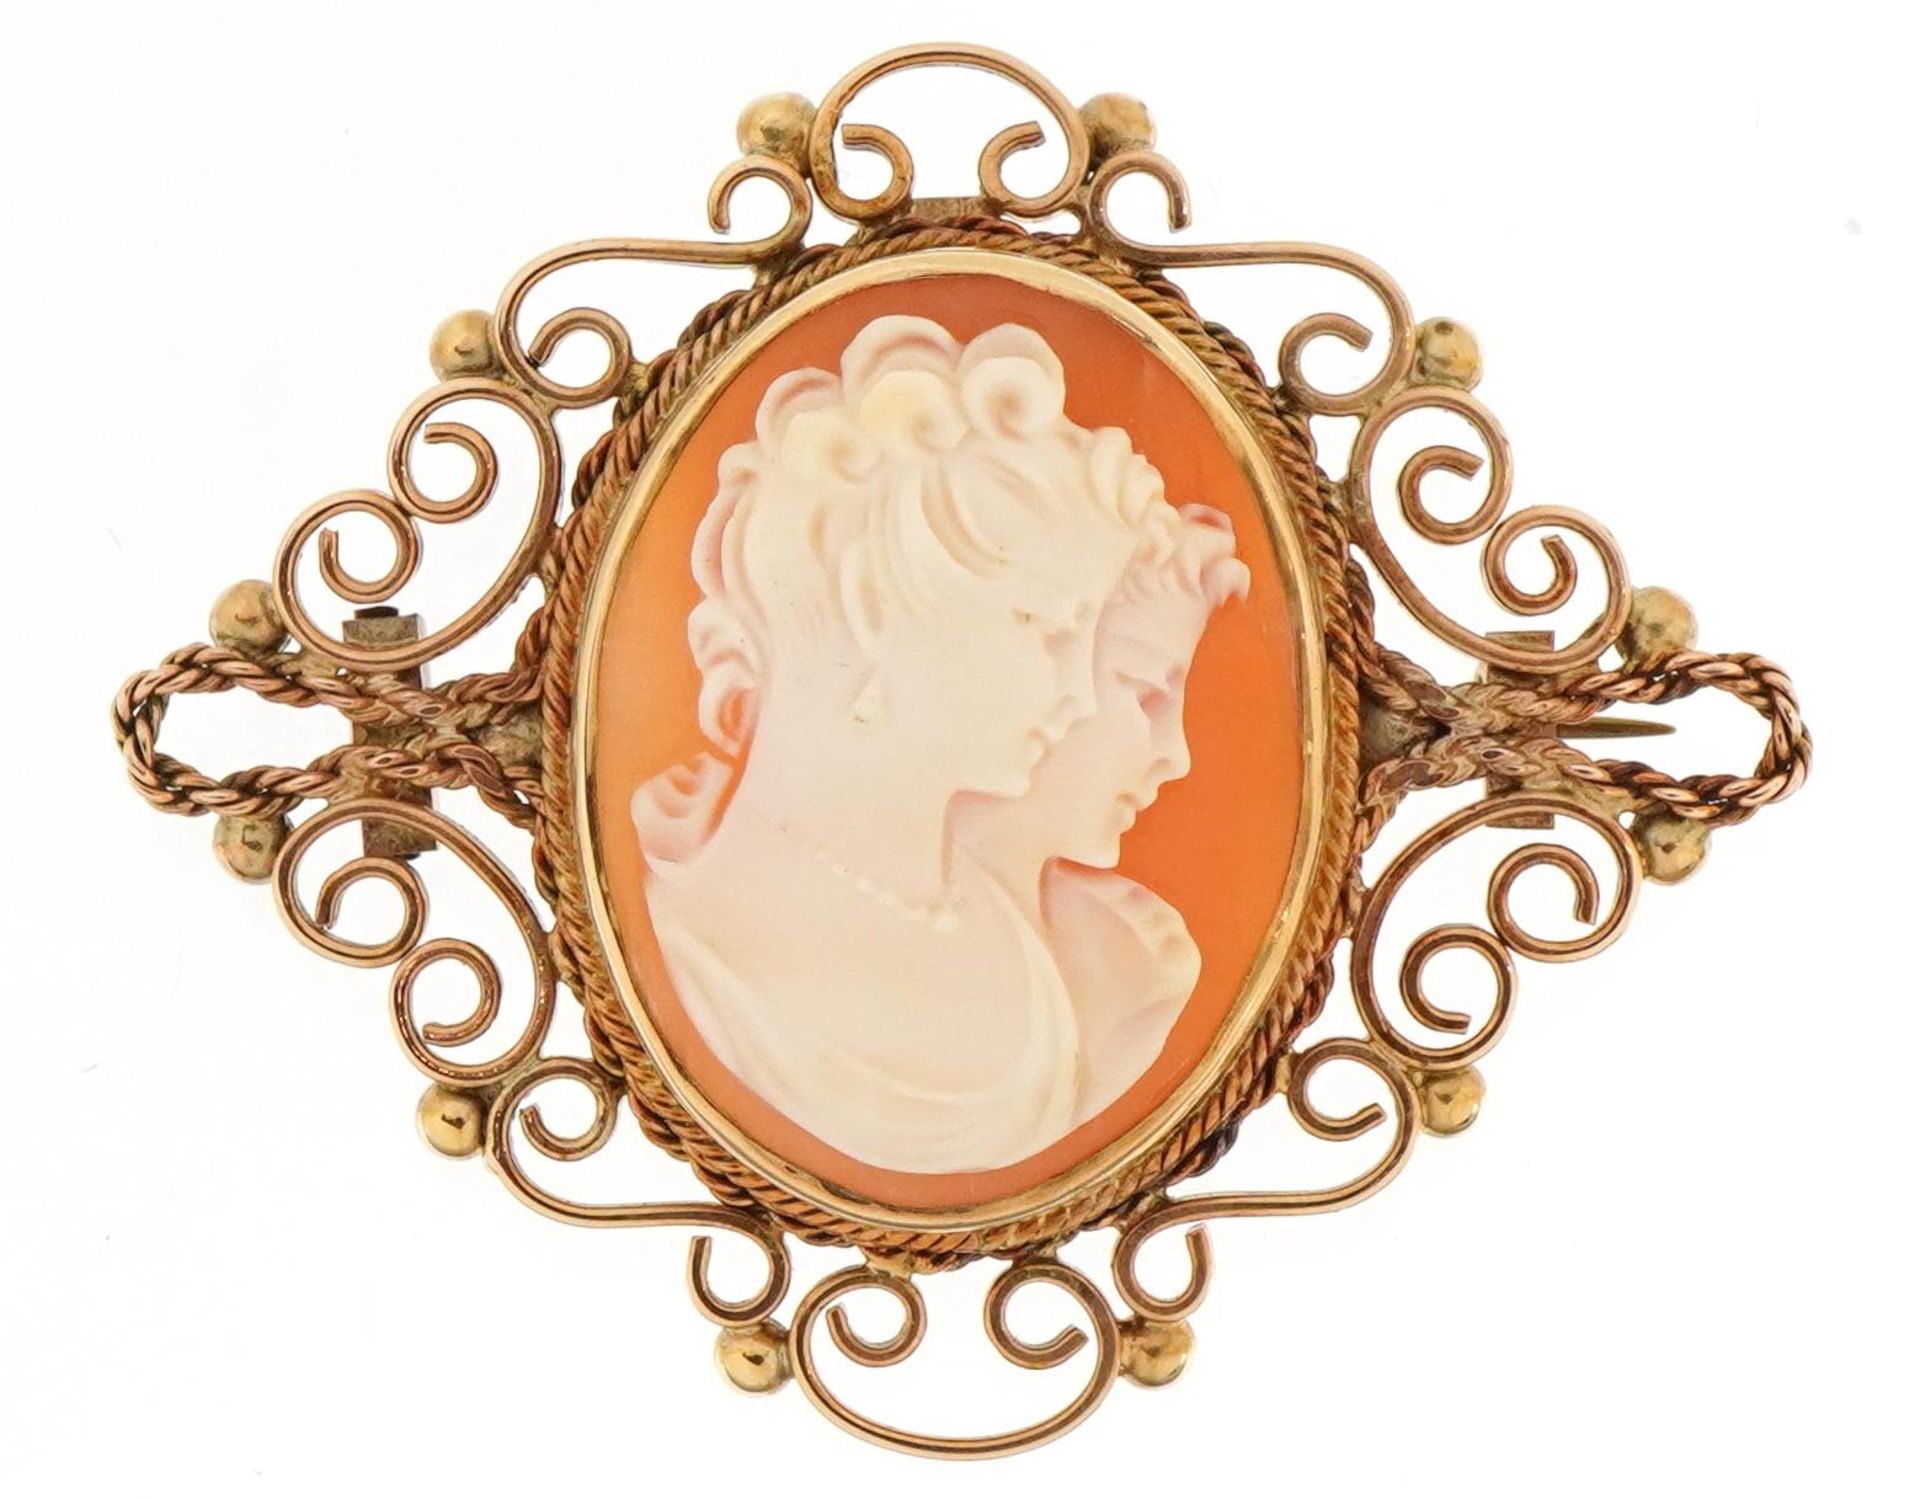 9ct gold mounted cameo brooch with yellow metal safety chain and carved with two females, 5.4cm